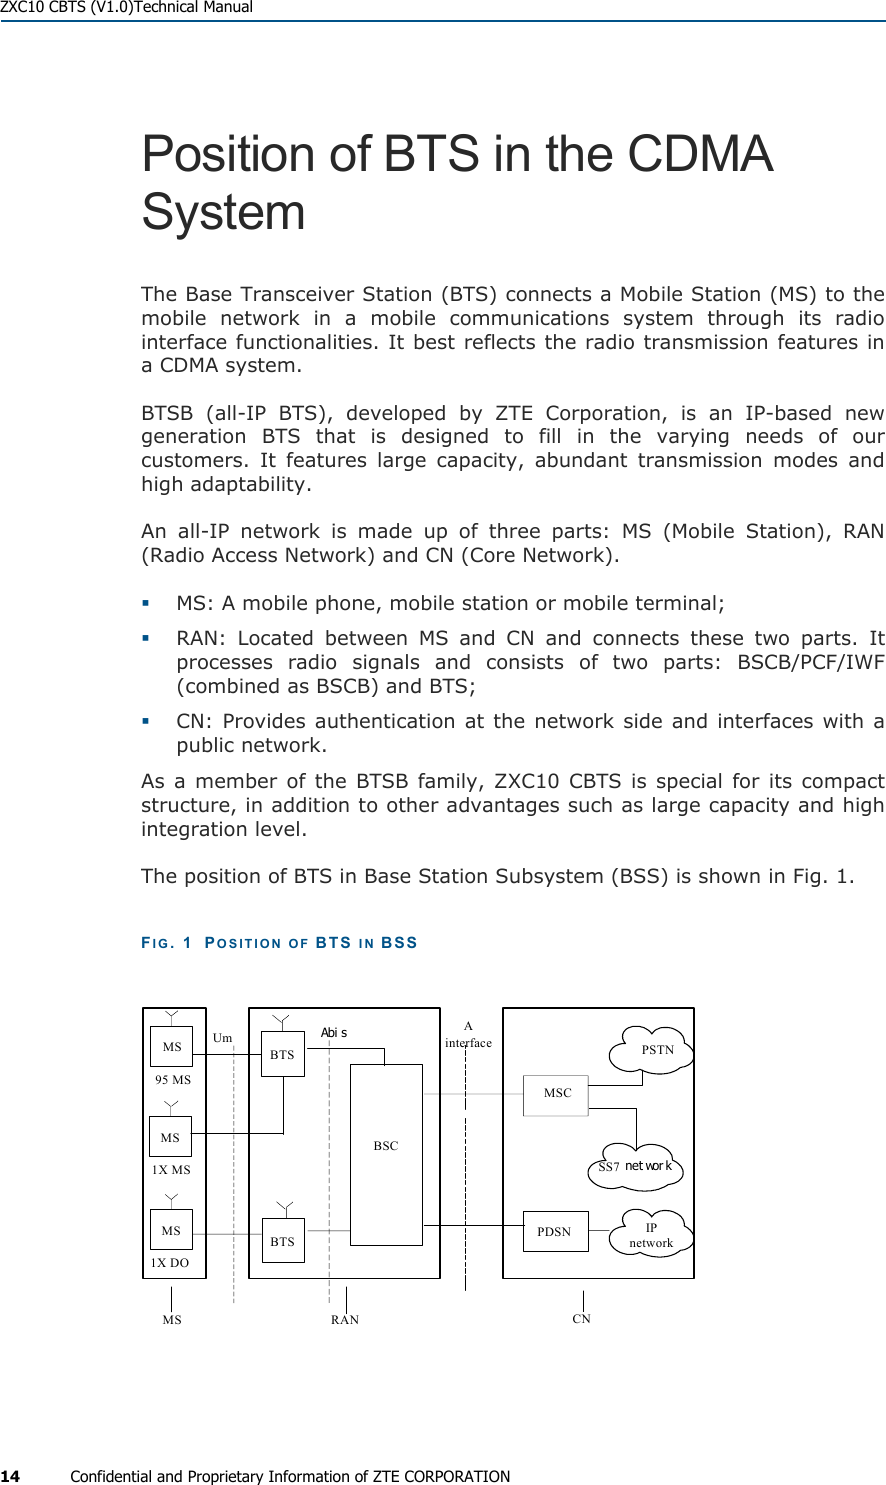  ZXC10 CBTS (V1.0)Technical Manual 14  Confidential and Proprietary Information of ZTE CORPORATION Position of BTS in the CDMA System  The Base Transceiver Station (BTS) connects a Mobile Station (MS) to the mobile network in a mobile communications system through its radio interface functionalities. It best reflects the radio transmission features in a CDMA system. BTSB (all-IP BTS), developed by ZTE Corporation, is an IP-based new generation BTS that is designed to fill in the varying needs of our customers. It features large capacity, abundant transmission modes and high adaptability.  An all-IP network is made up of three parts: MS (Mobile Station), RAN (Radio Access Network) and CN (Core Network).   MS: A mobile phone, mobile station or mobile terminal;   RAN: Located between MS and CN and connects these two parts. It processes radio signals and consists of two parts: BSCB/PCF/IWF (combined as BSCB) and BTS;   CN: Provides authentication at the network side and interfaces with a public network. As a member of the BTSB family, ZXC10 CBTS is special for its compact structure, in addition to other advantages such as large capacity and high integration level. The position of BTS in Base Station Subsystem (BSS) is shown in Fig. 1. FIG. 1  POSITION OF BTS IN BSS PSTNUm Abi sBSCMSCPDSNSS7 net wor kBTSMS95 MS1X MS1X DOMS RAN CNIP networkMSMSBTSAinterface  